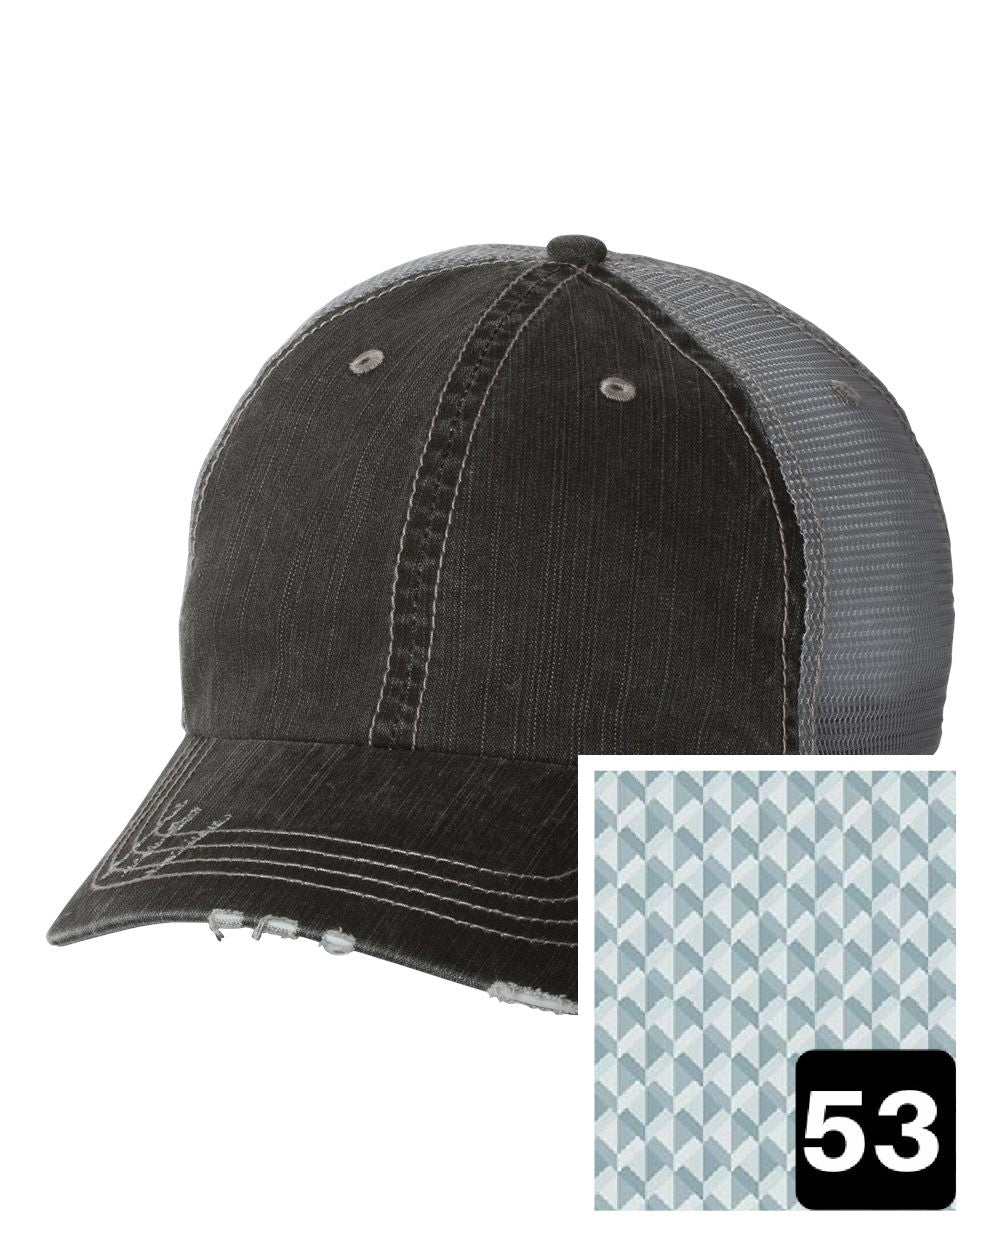 gray distressed trucker hat with multi-color stripe fabric state of New Jersey